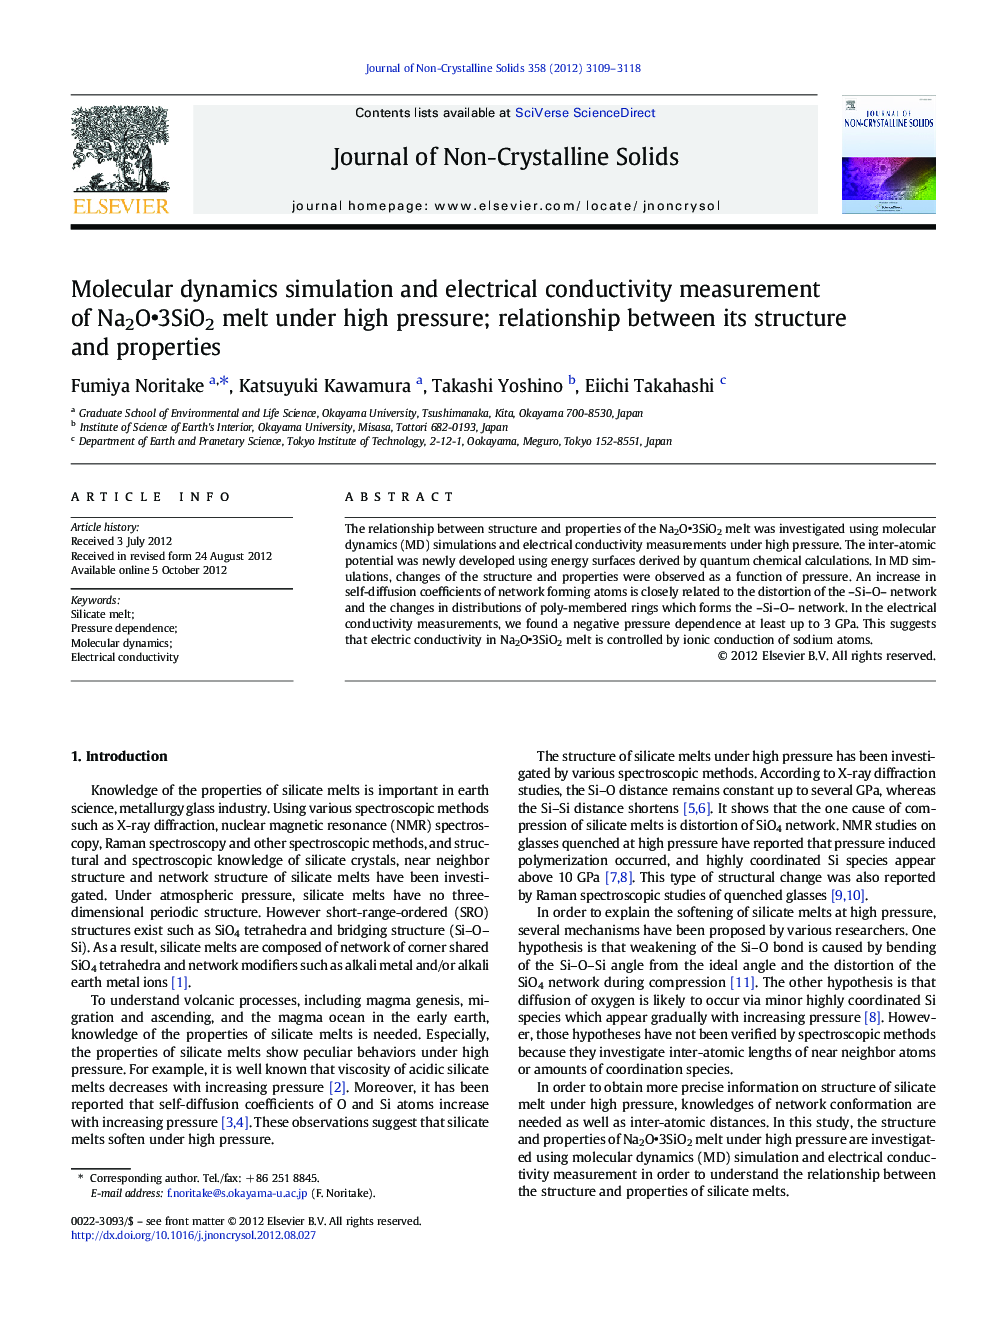 Molecular dynamics simulation and electrical conductivity measurement of Na2Oâ¢3SiO2 melt under high pressure; relationship between its structure and properties